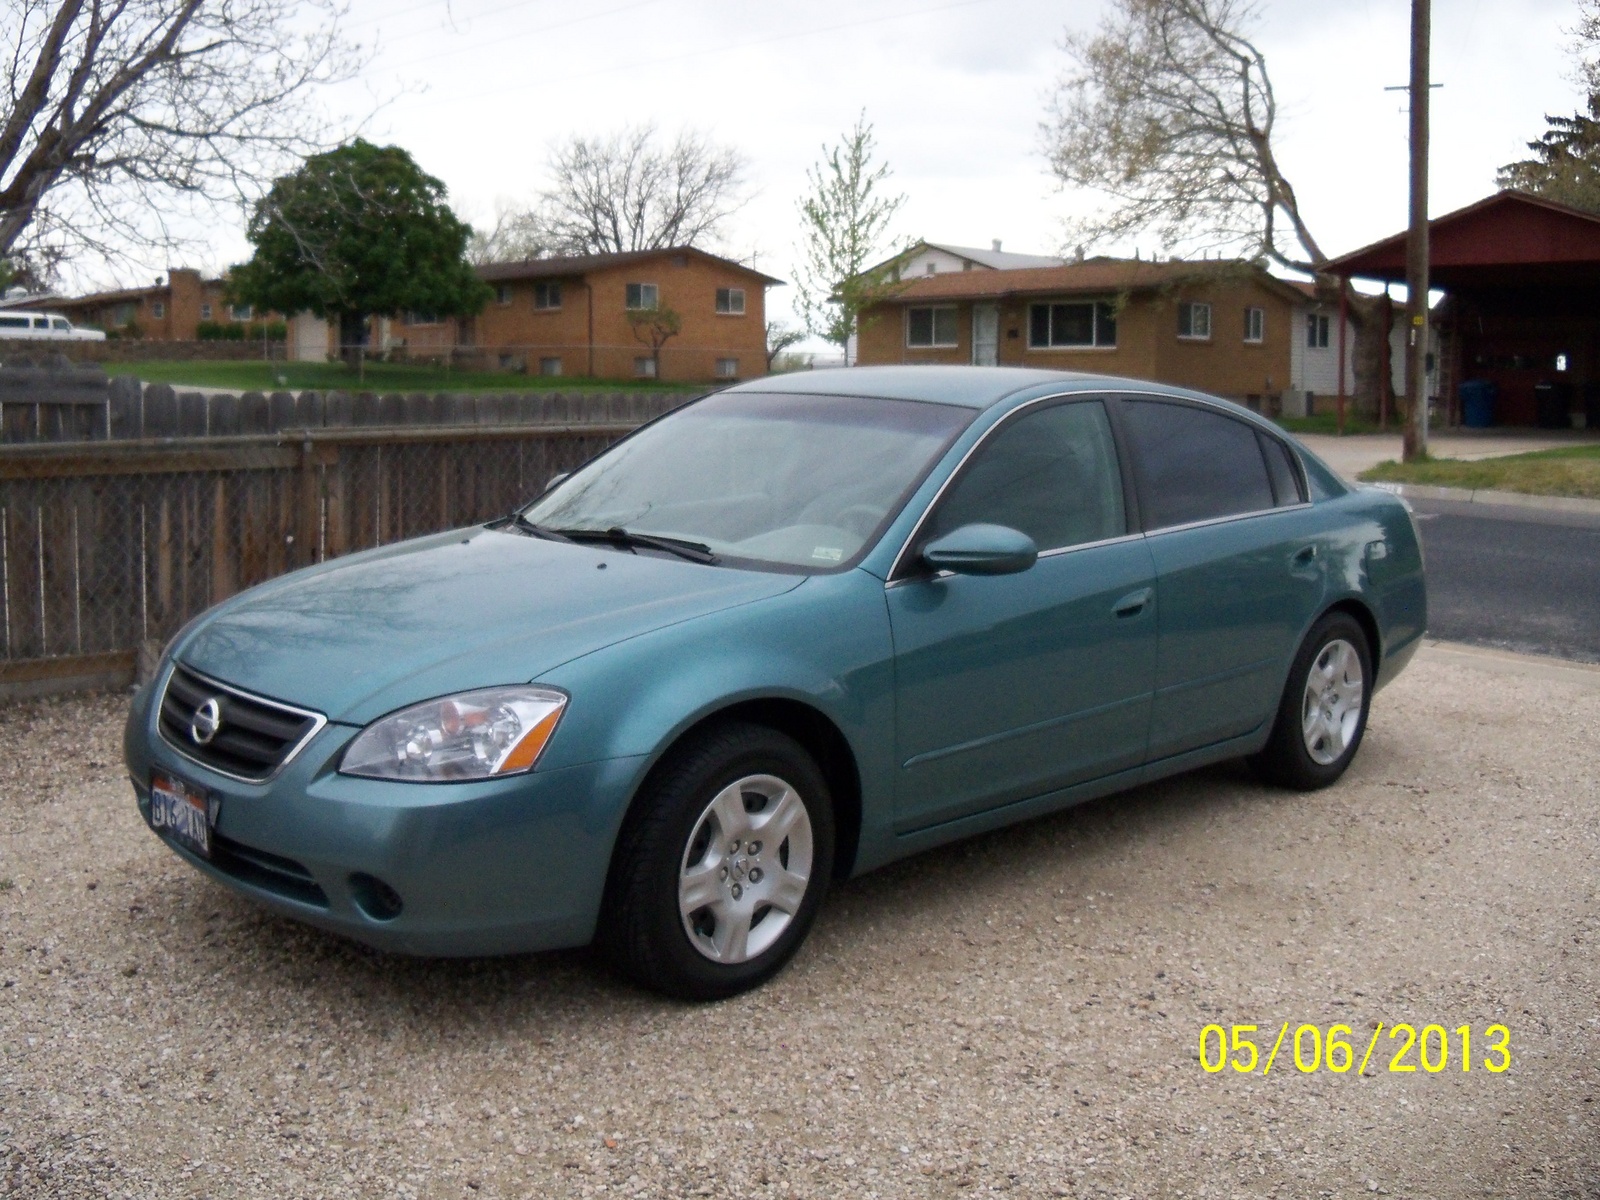 Nissan altima s 2003 review #5